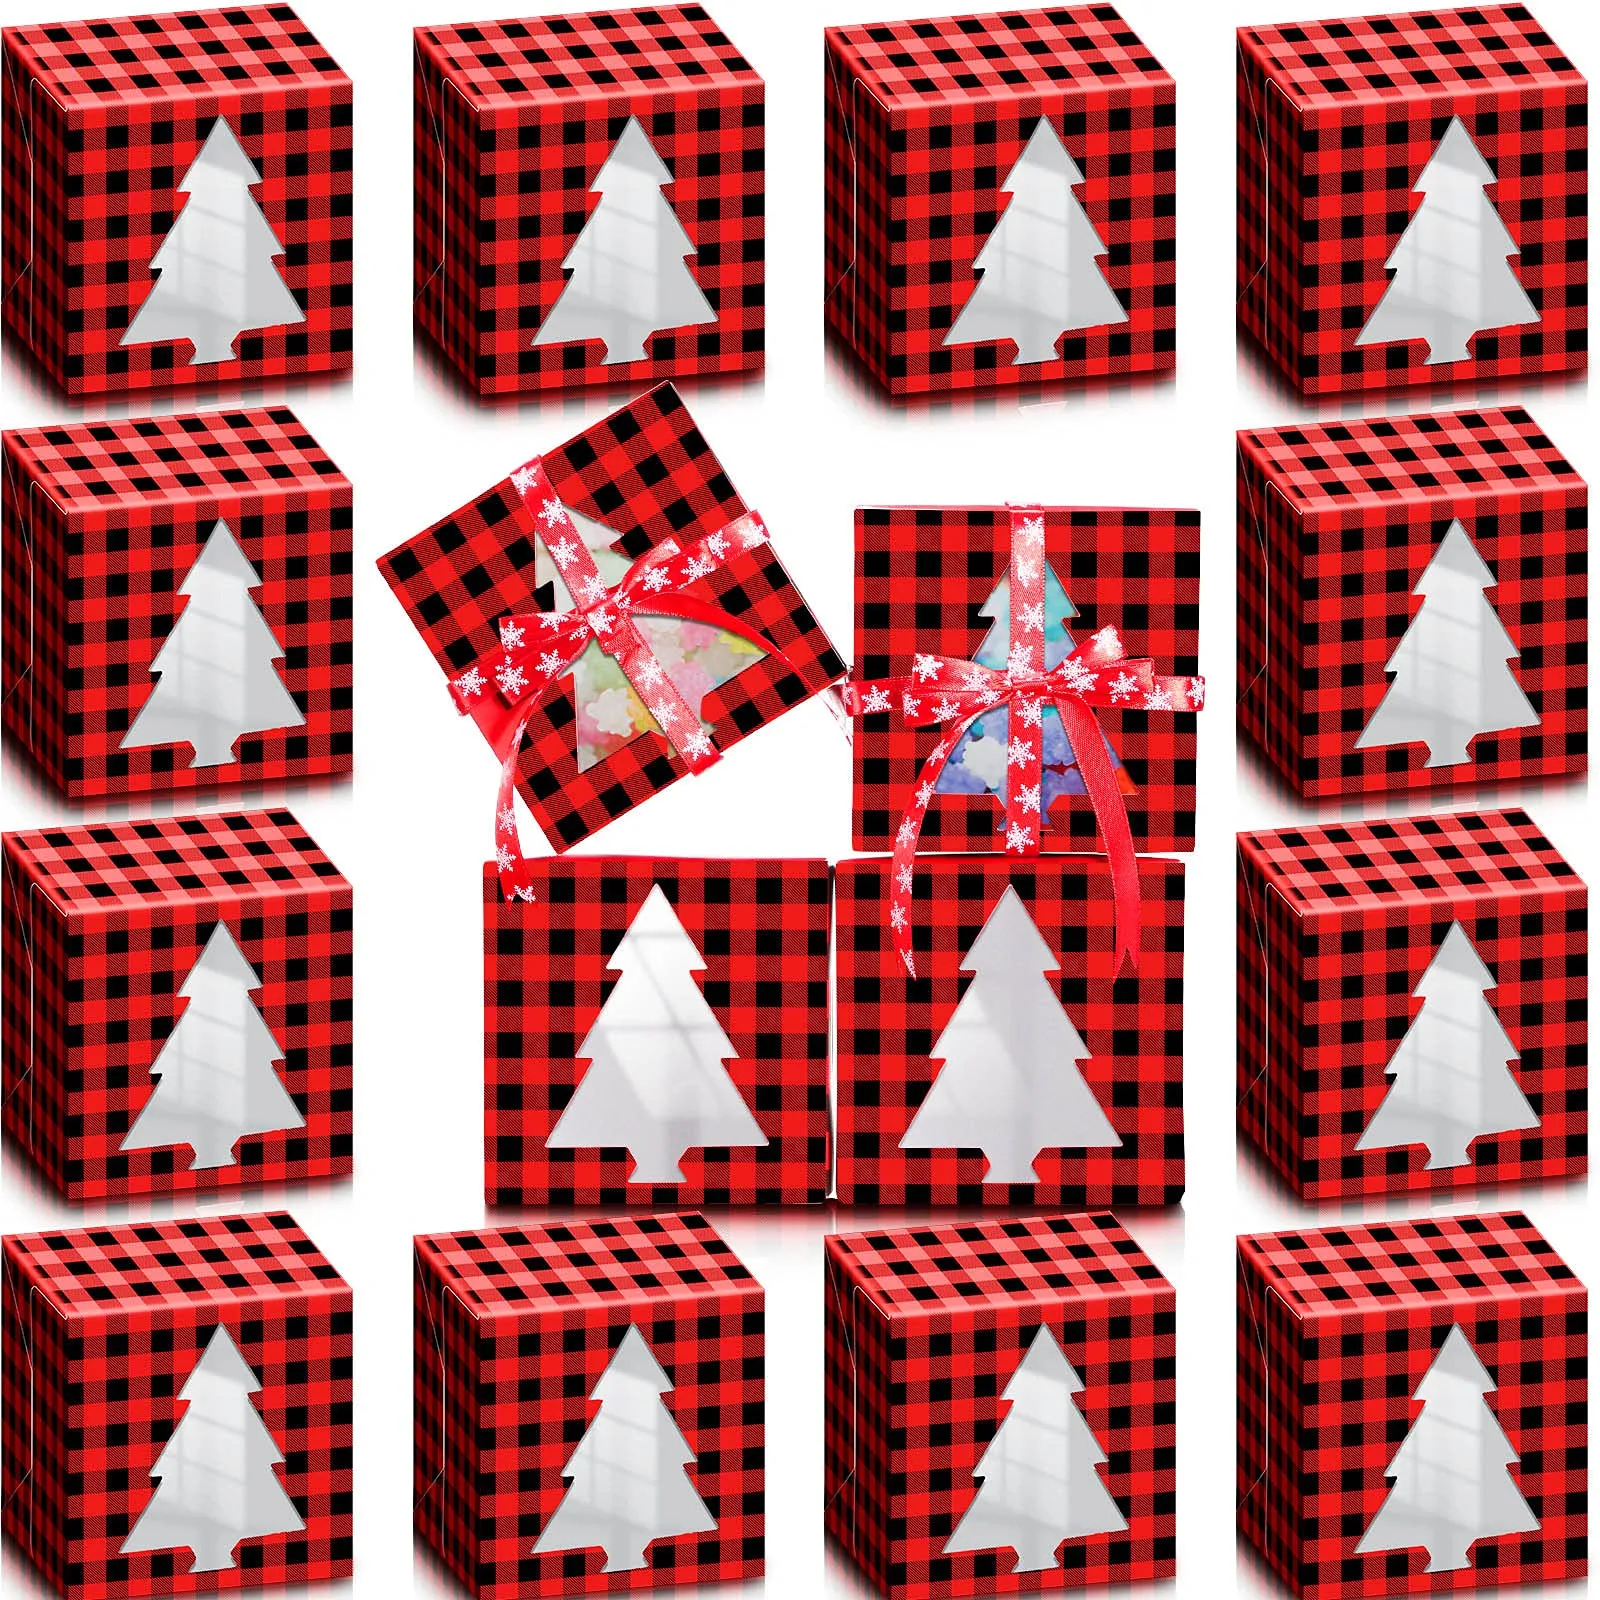 goody candy bags christmas house cardboard treat boxes house shaped paper candy box with handles for wedding holiday party favor cardboard paper gift bags